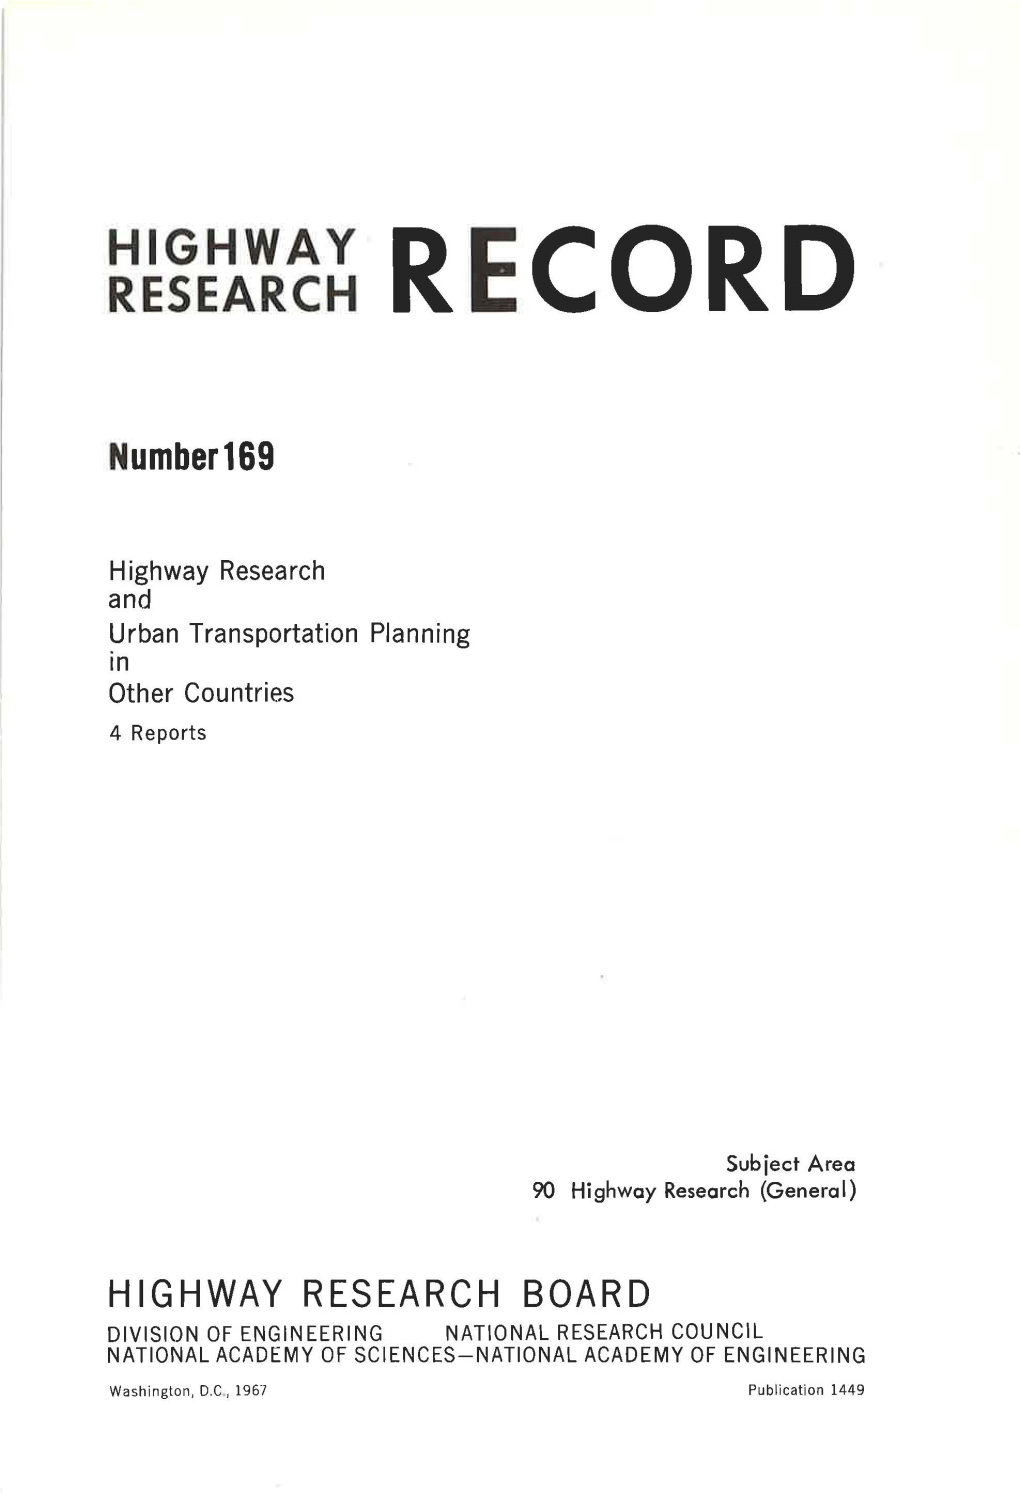 Highway Research Record